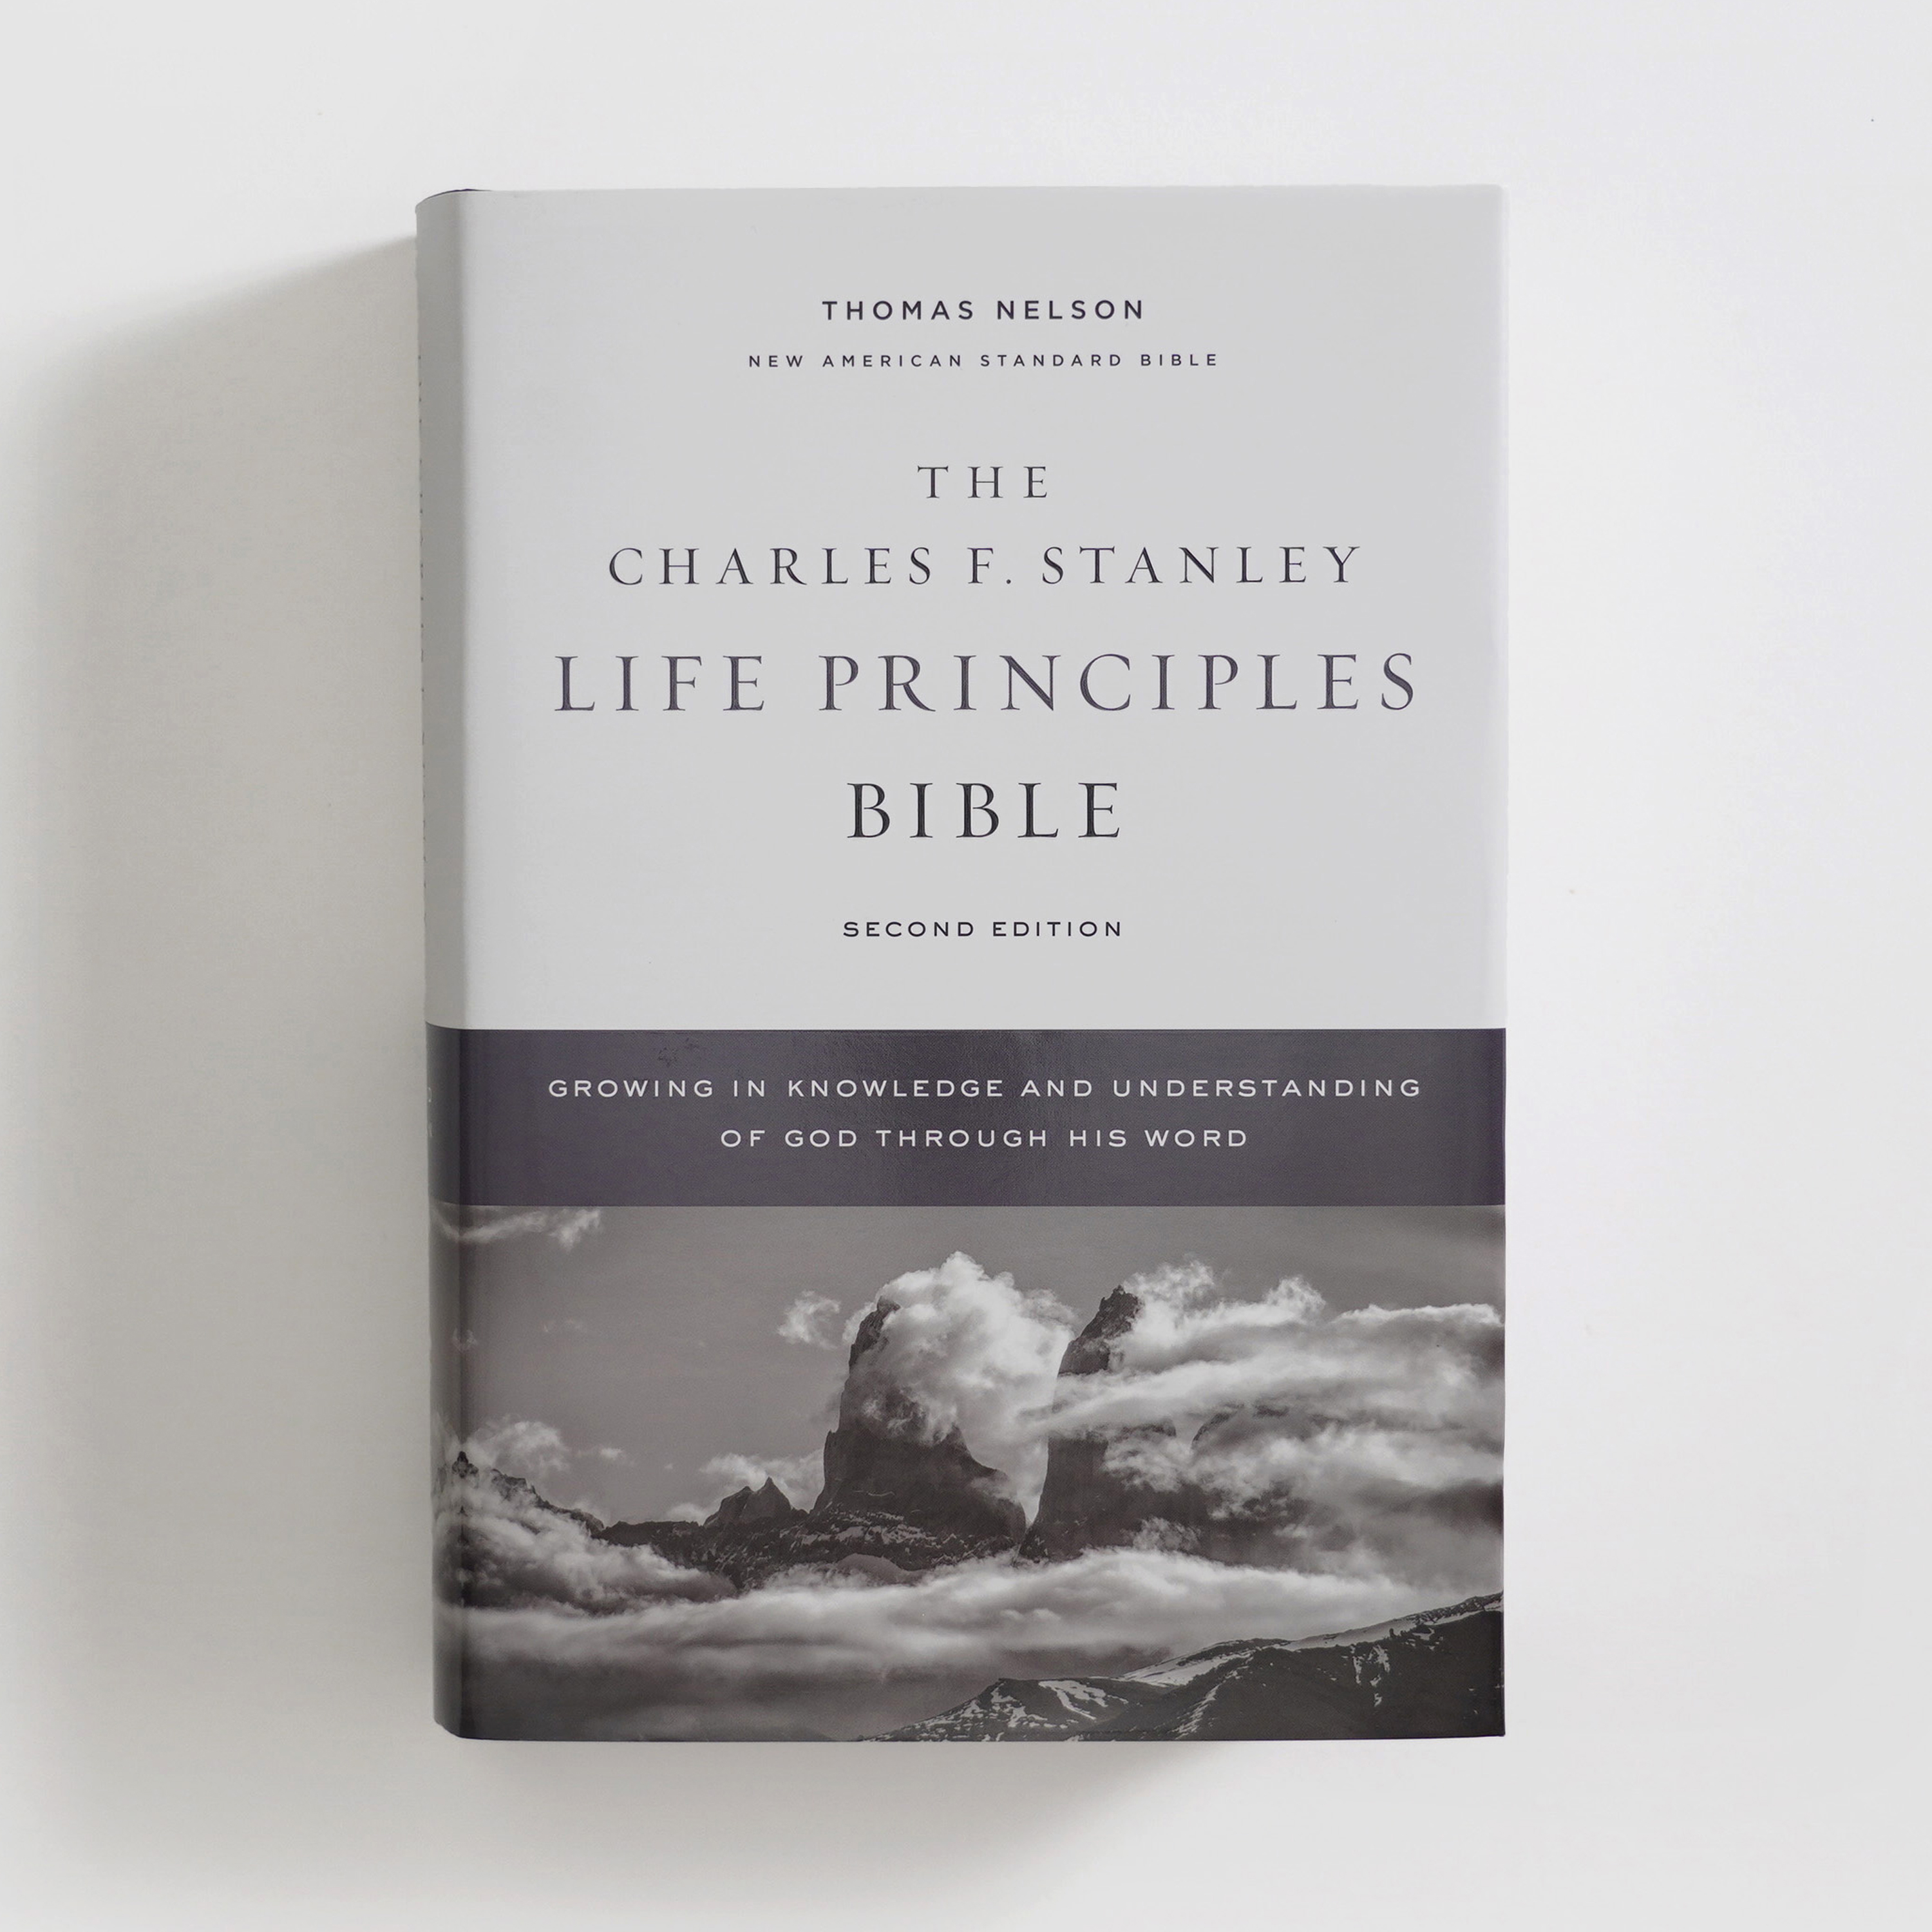 The Charles F. Stanley Life Principles Bible 2nd Edition, NASB - Hardcover